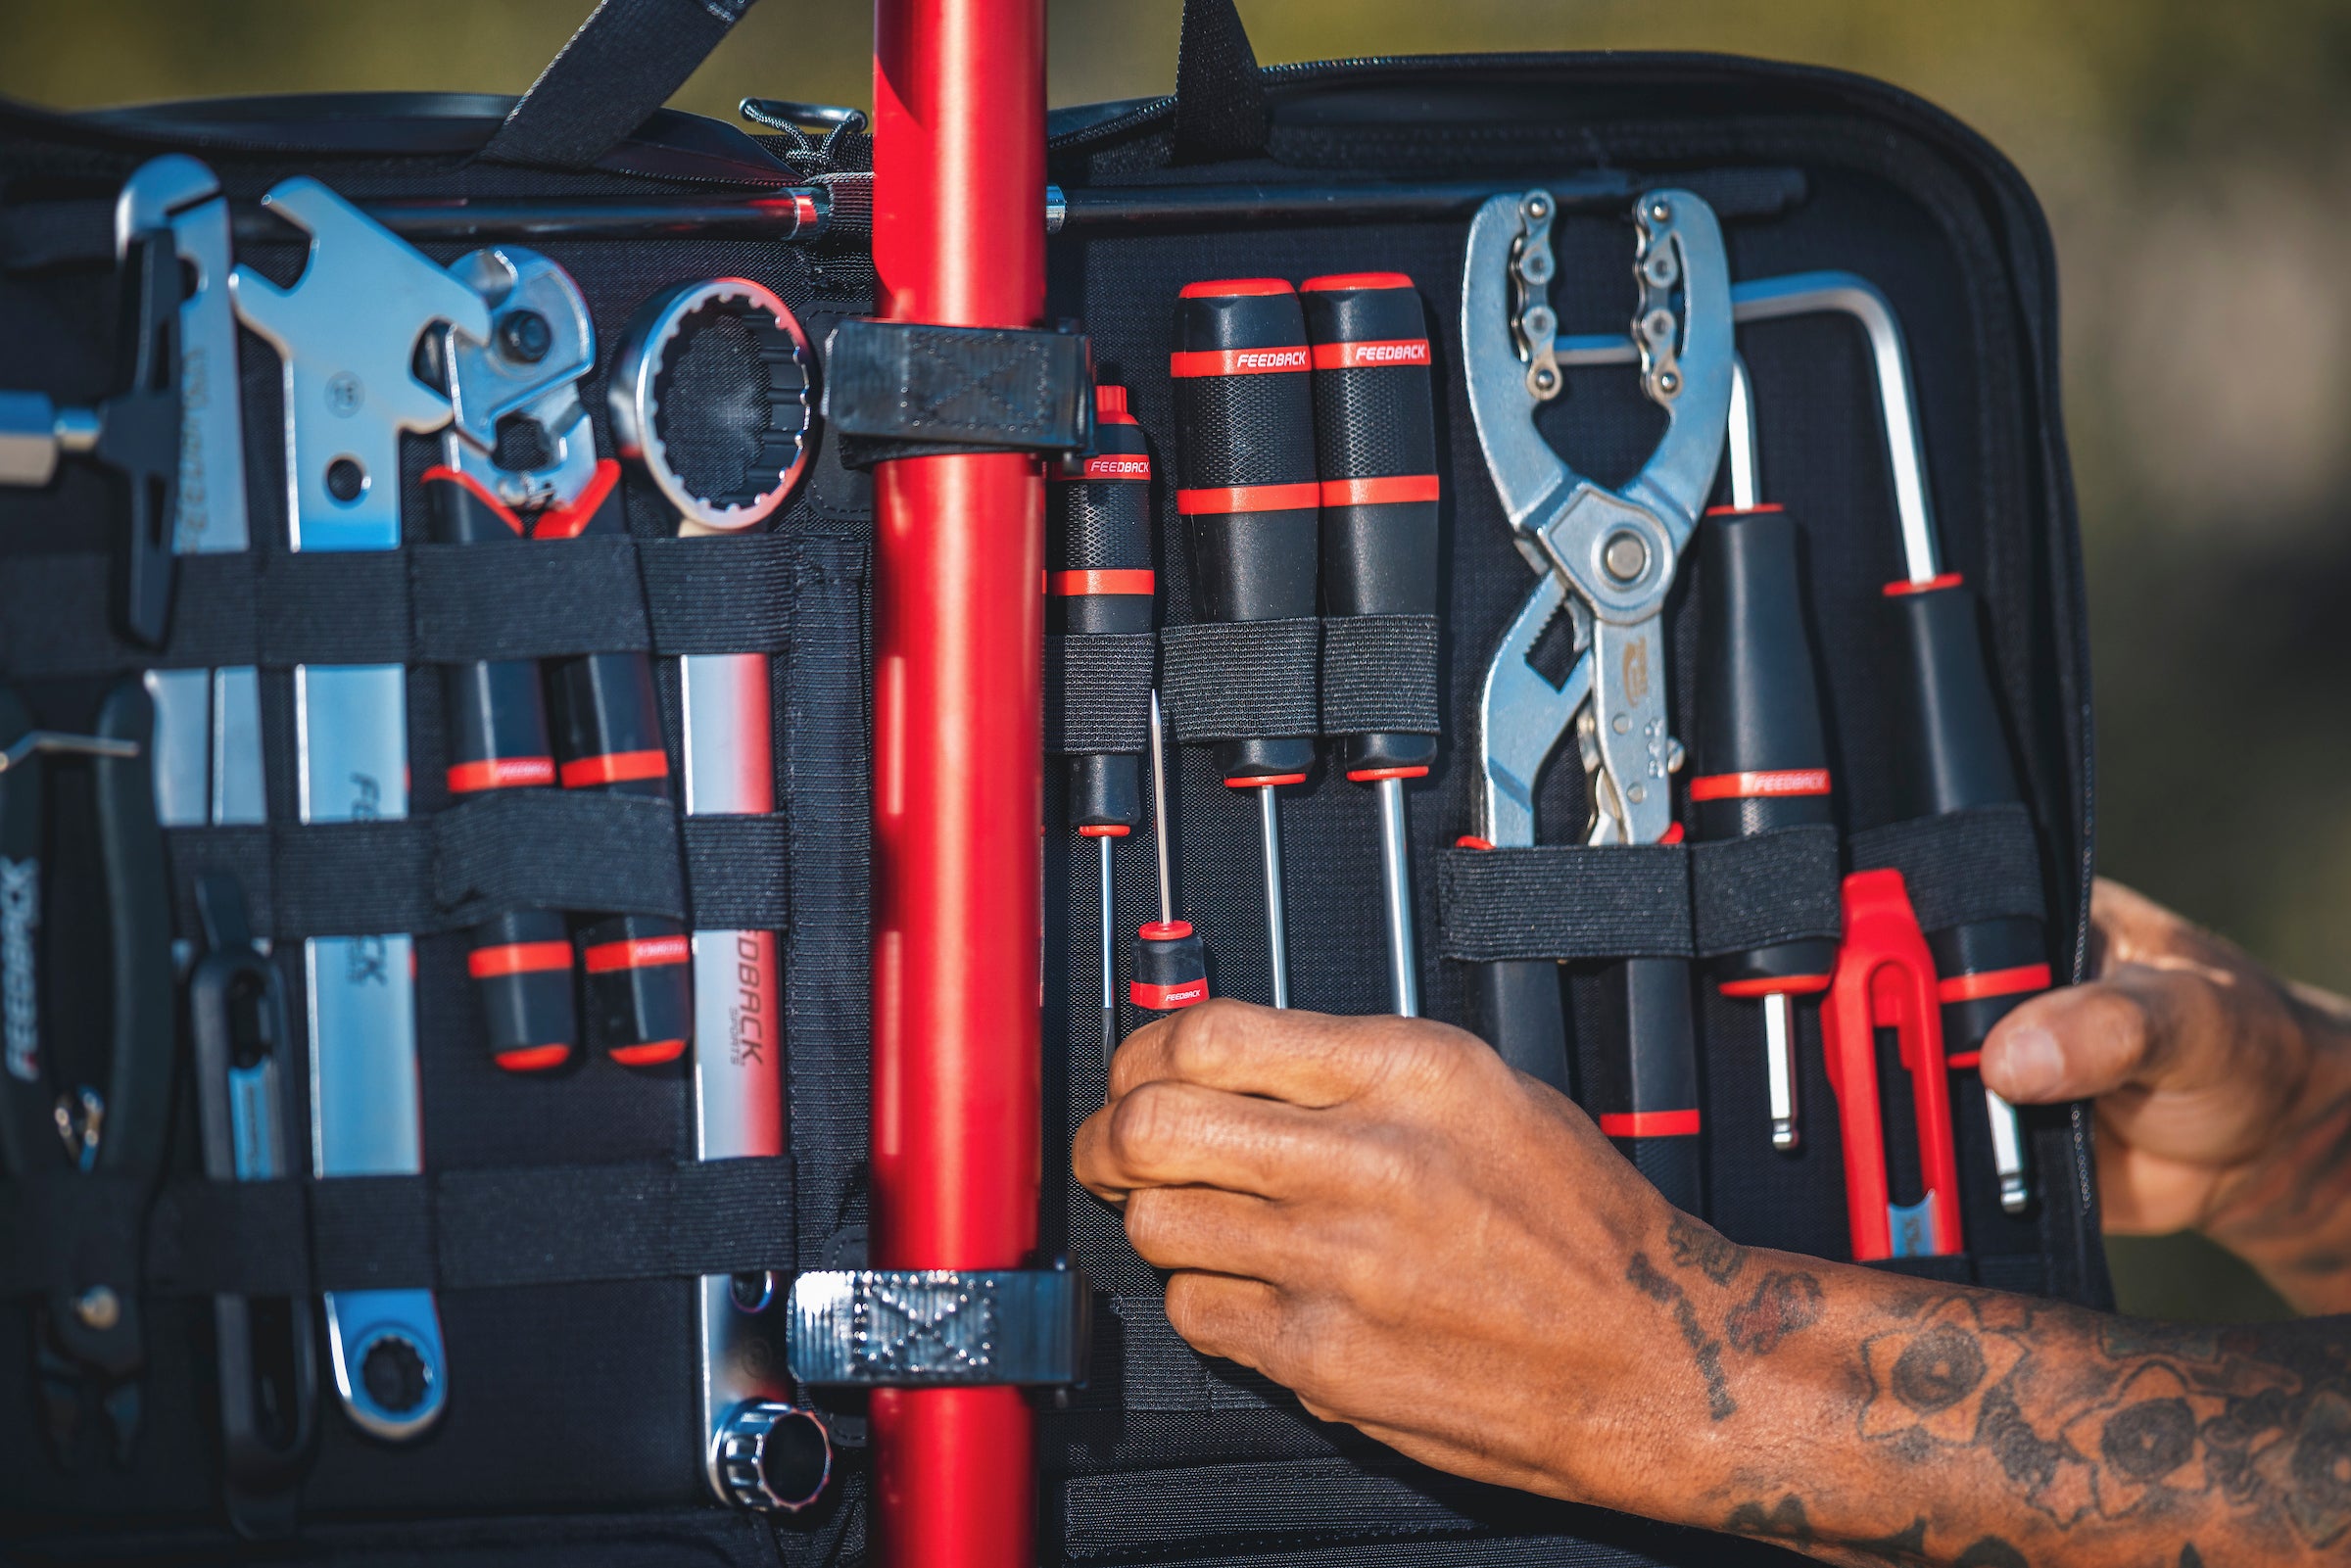 Bike tool kit close up with person removing tool.